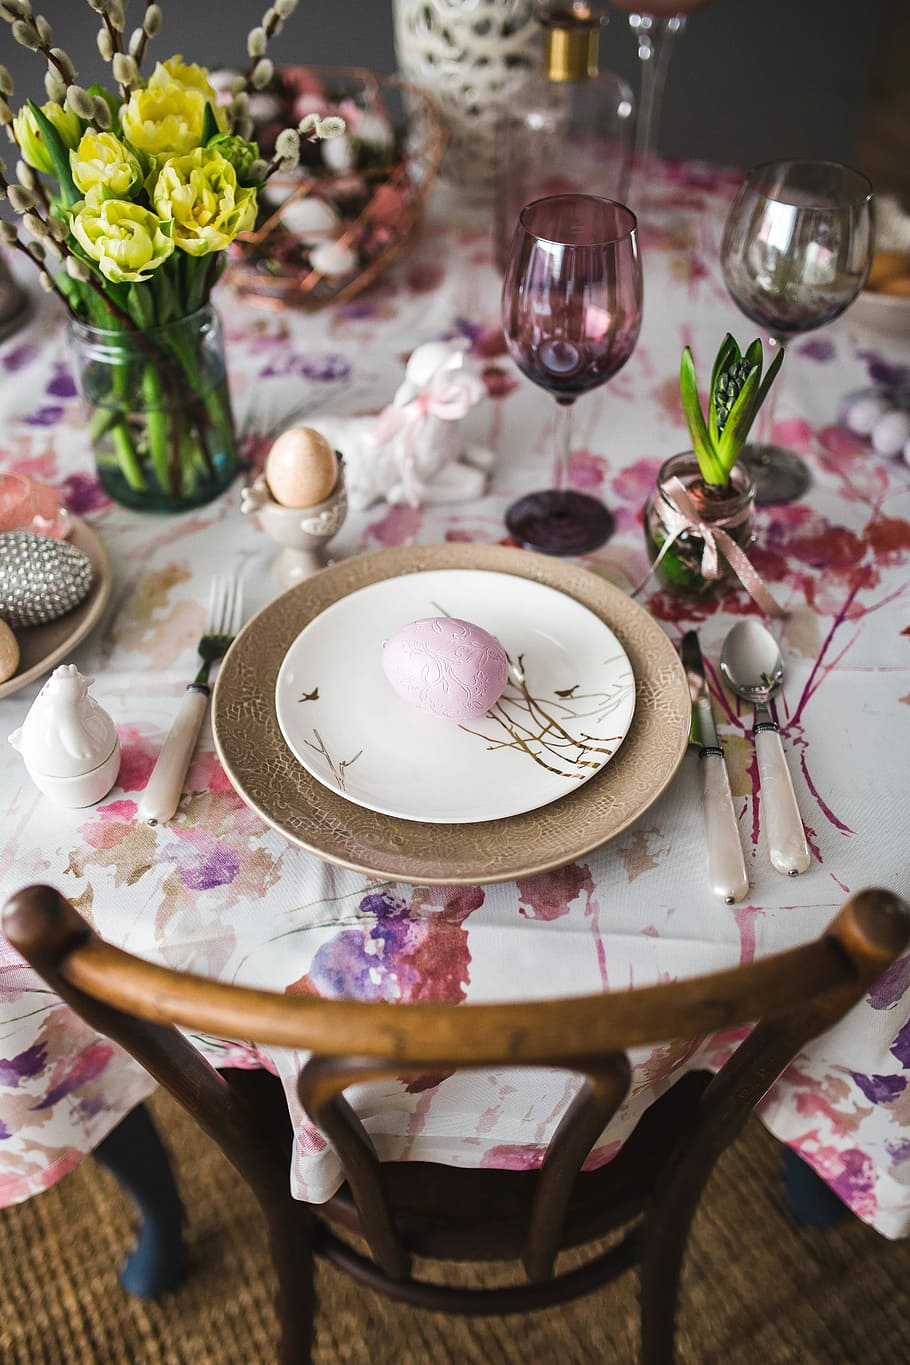 HD wallpaper: Easter table with cute pink decorations, flowers